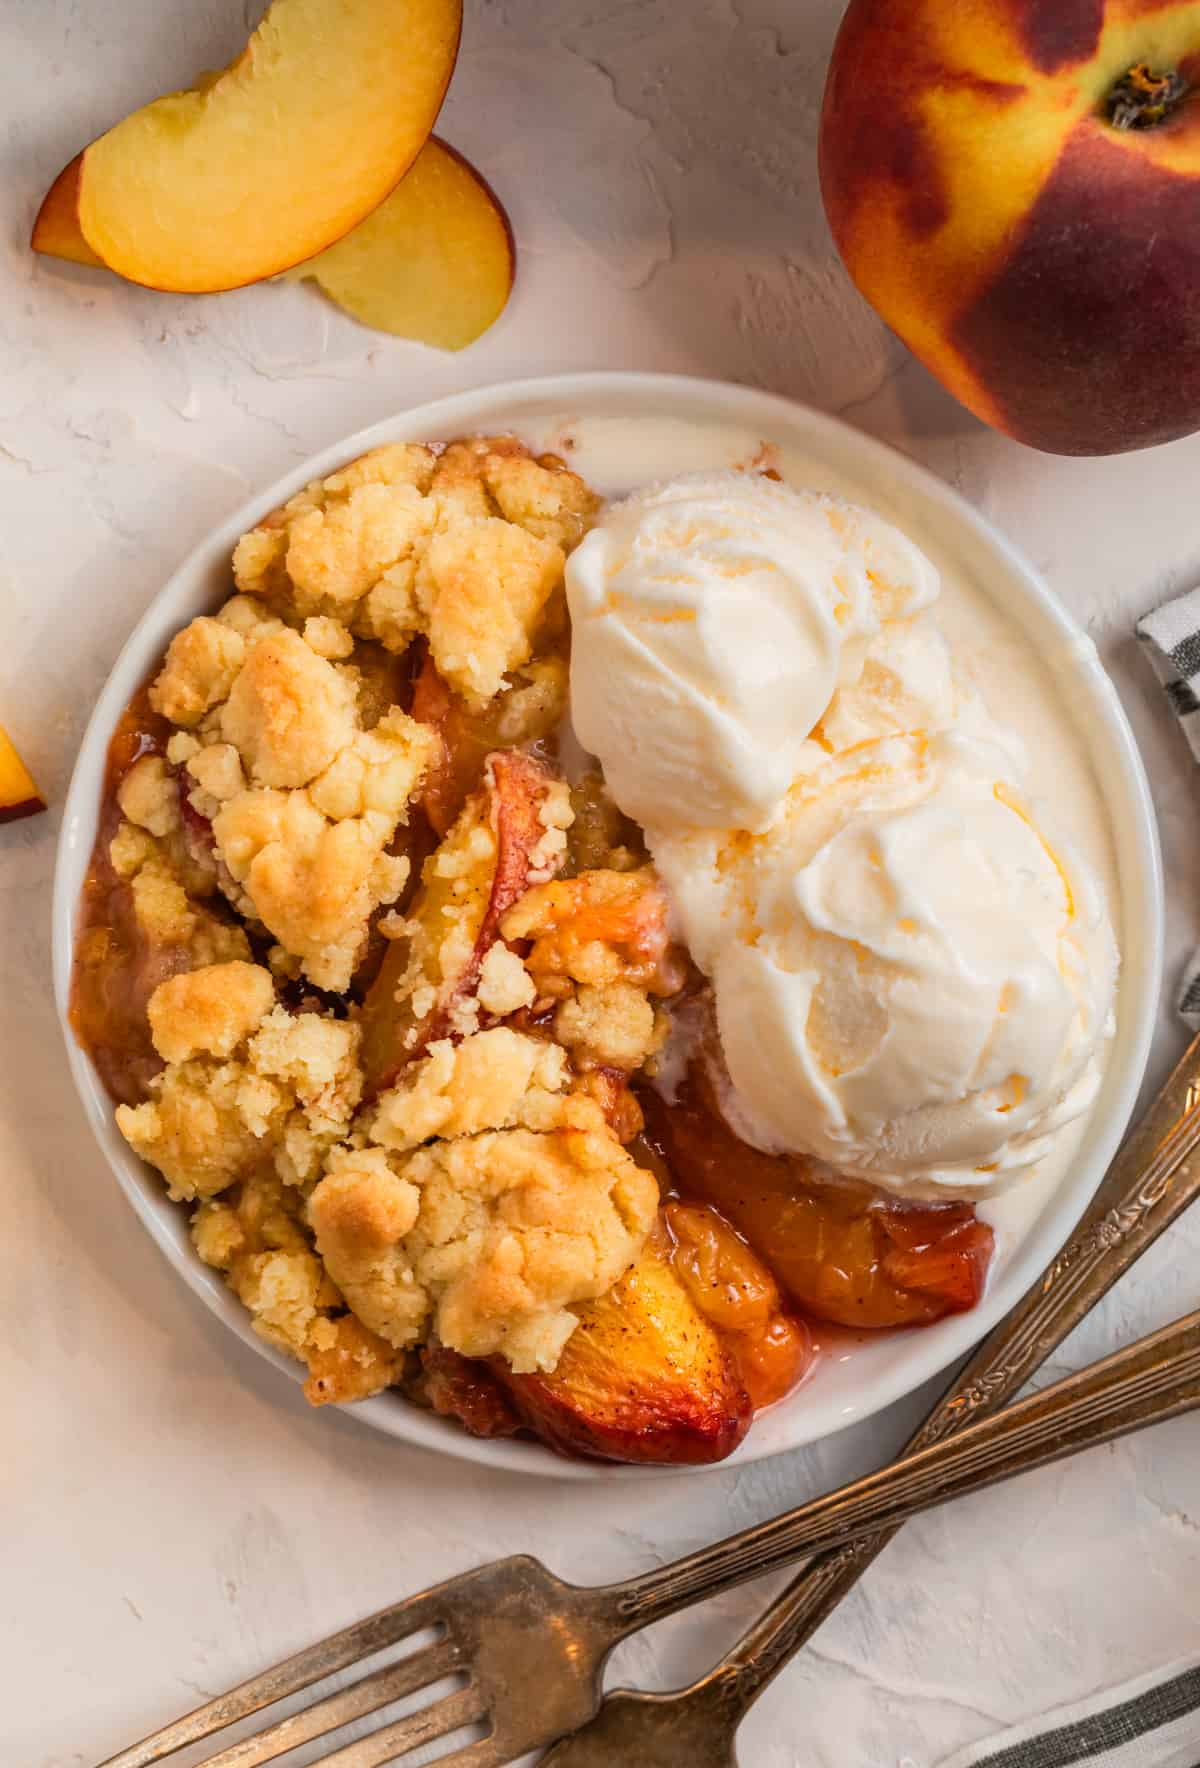 Peach cobbler made with cake mix on white plate with vanilla ice cream scoops.